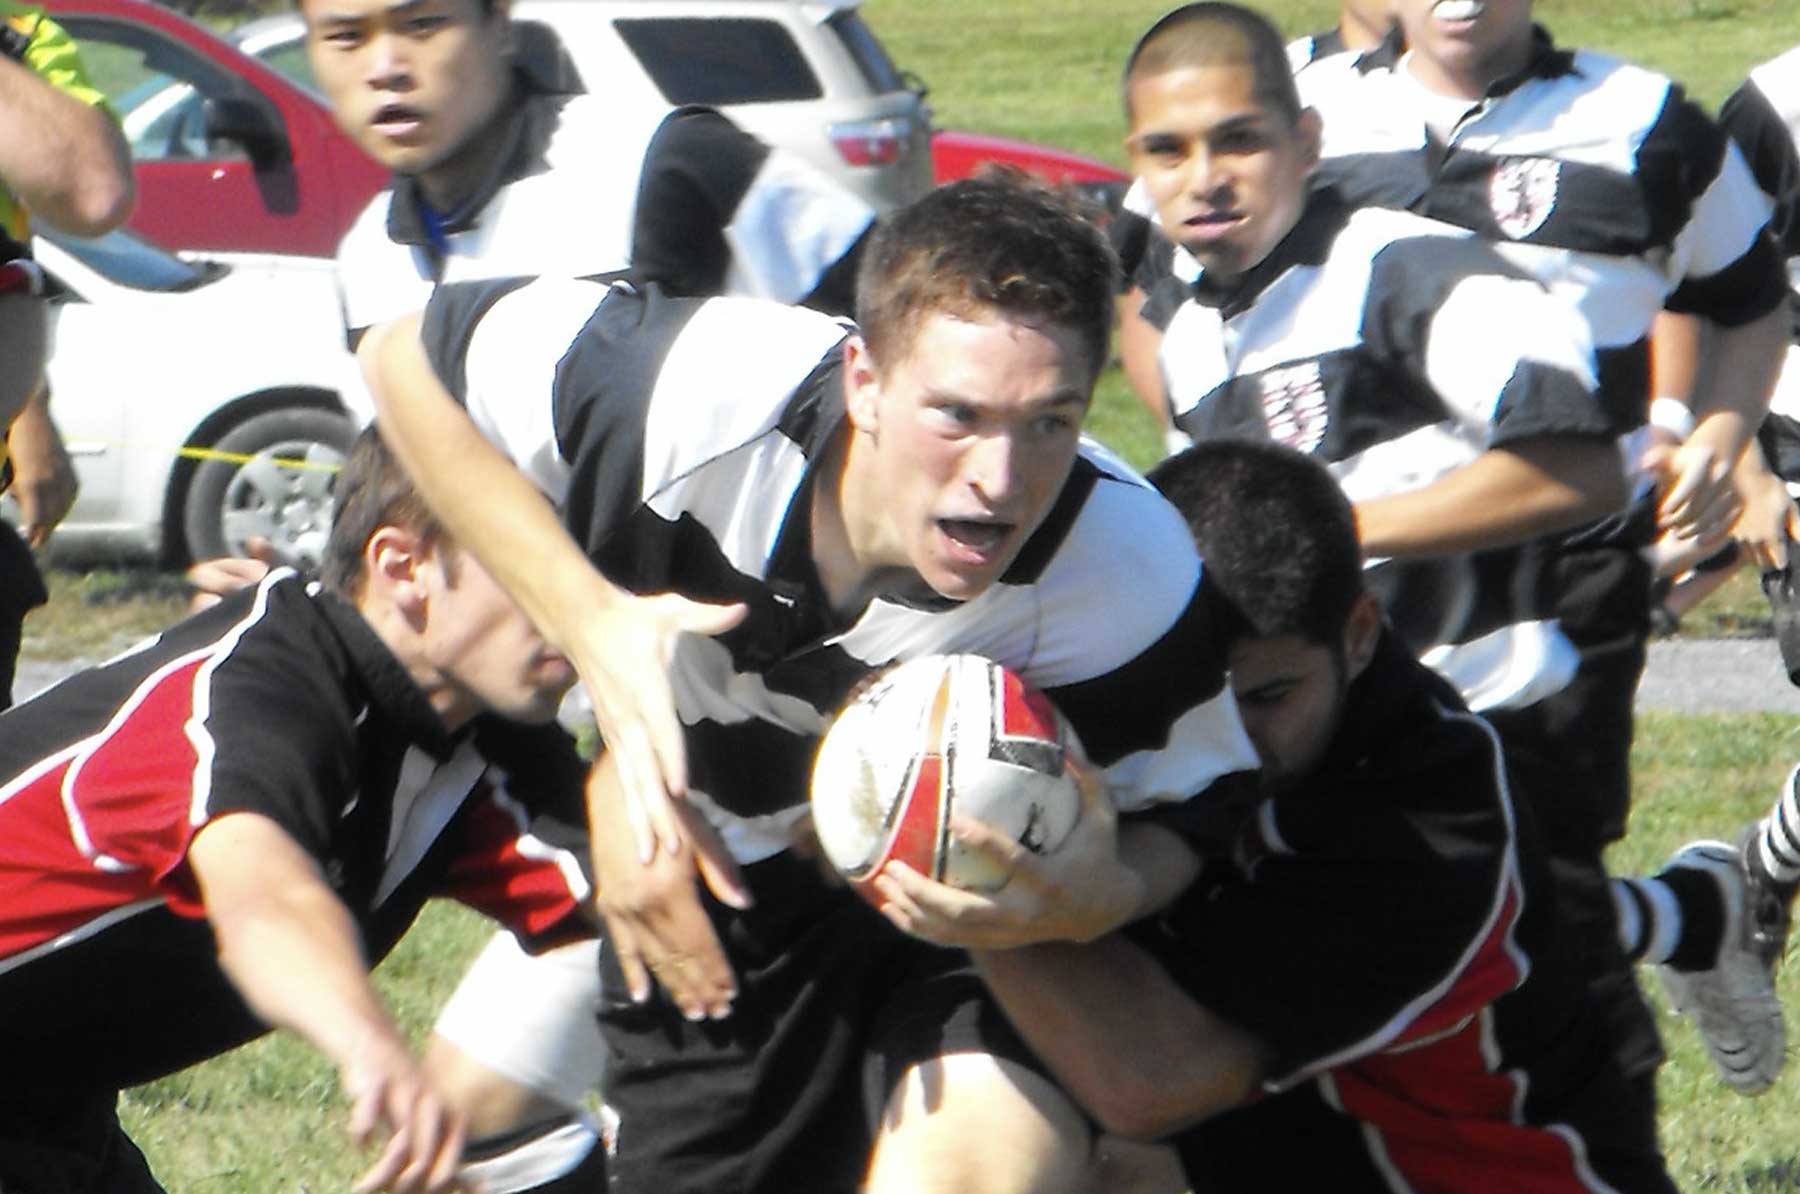 rugby image